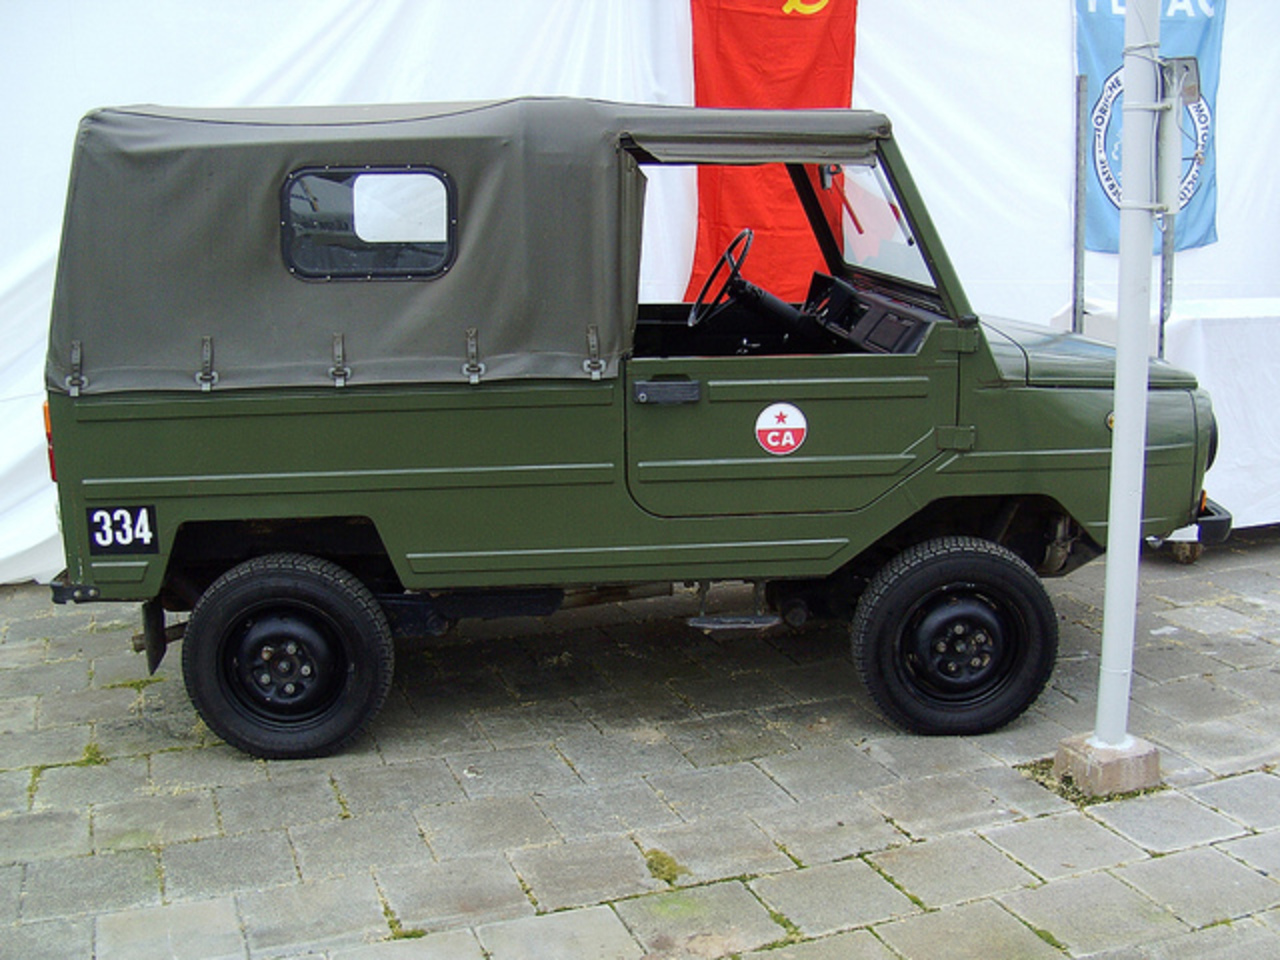 1981 LUAZ 969M, a Soviet Army 4wd. | Flickr - Photo Sharing!